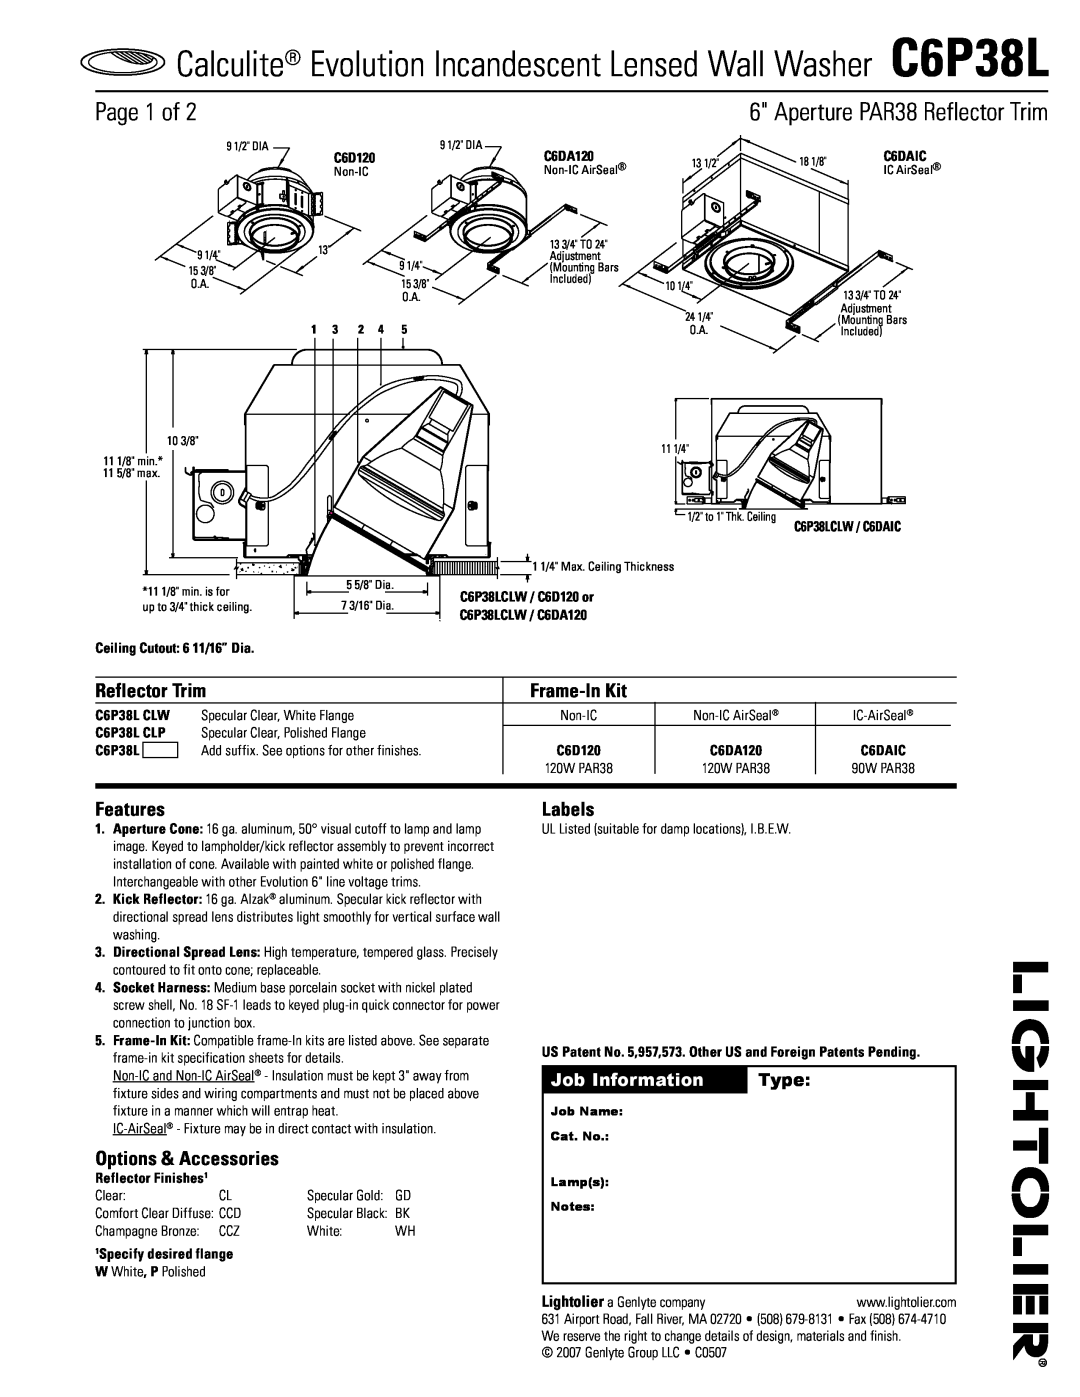 Lightolier C6P38L specifications Page of, Reflector Trim, Frame-InKit, Features, Options & Accessories, Labels, Type 